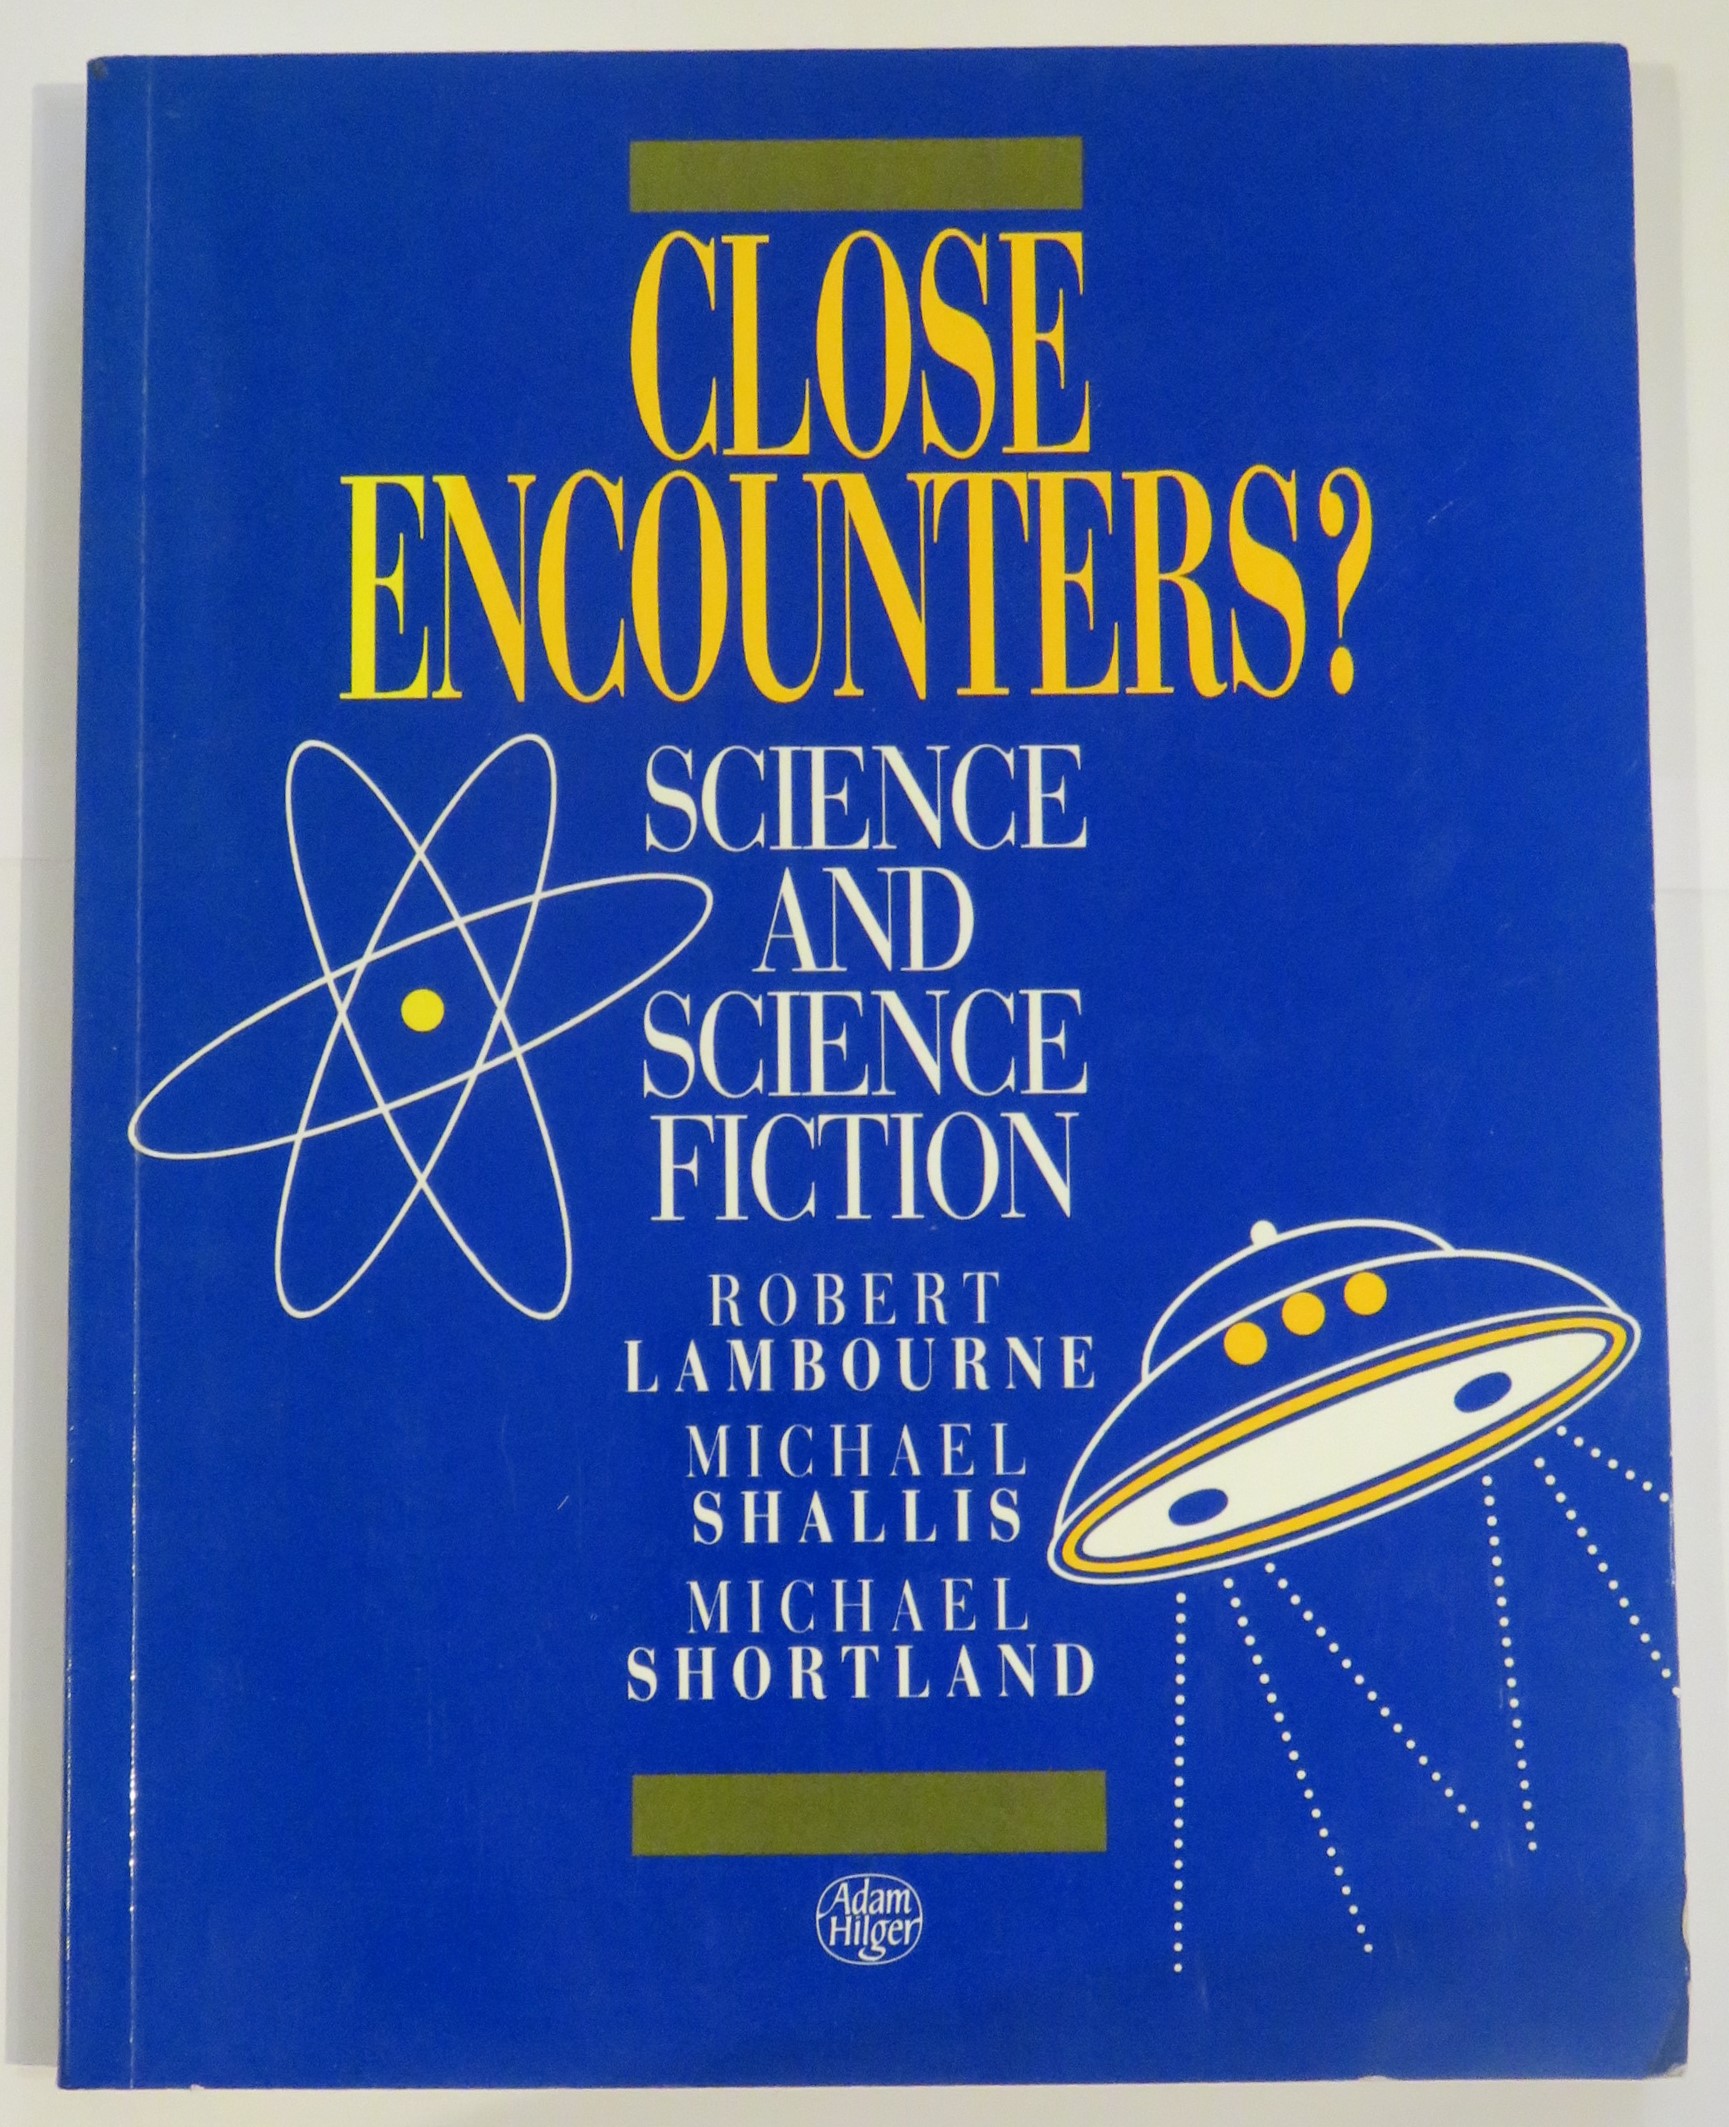 Close Encounters? Science and Science Fiction